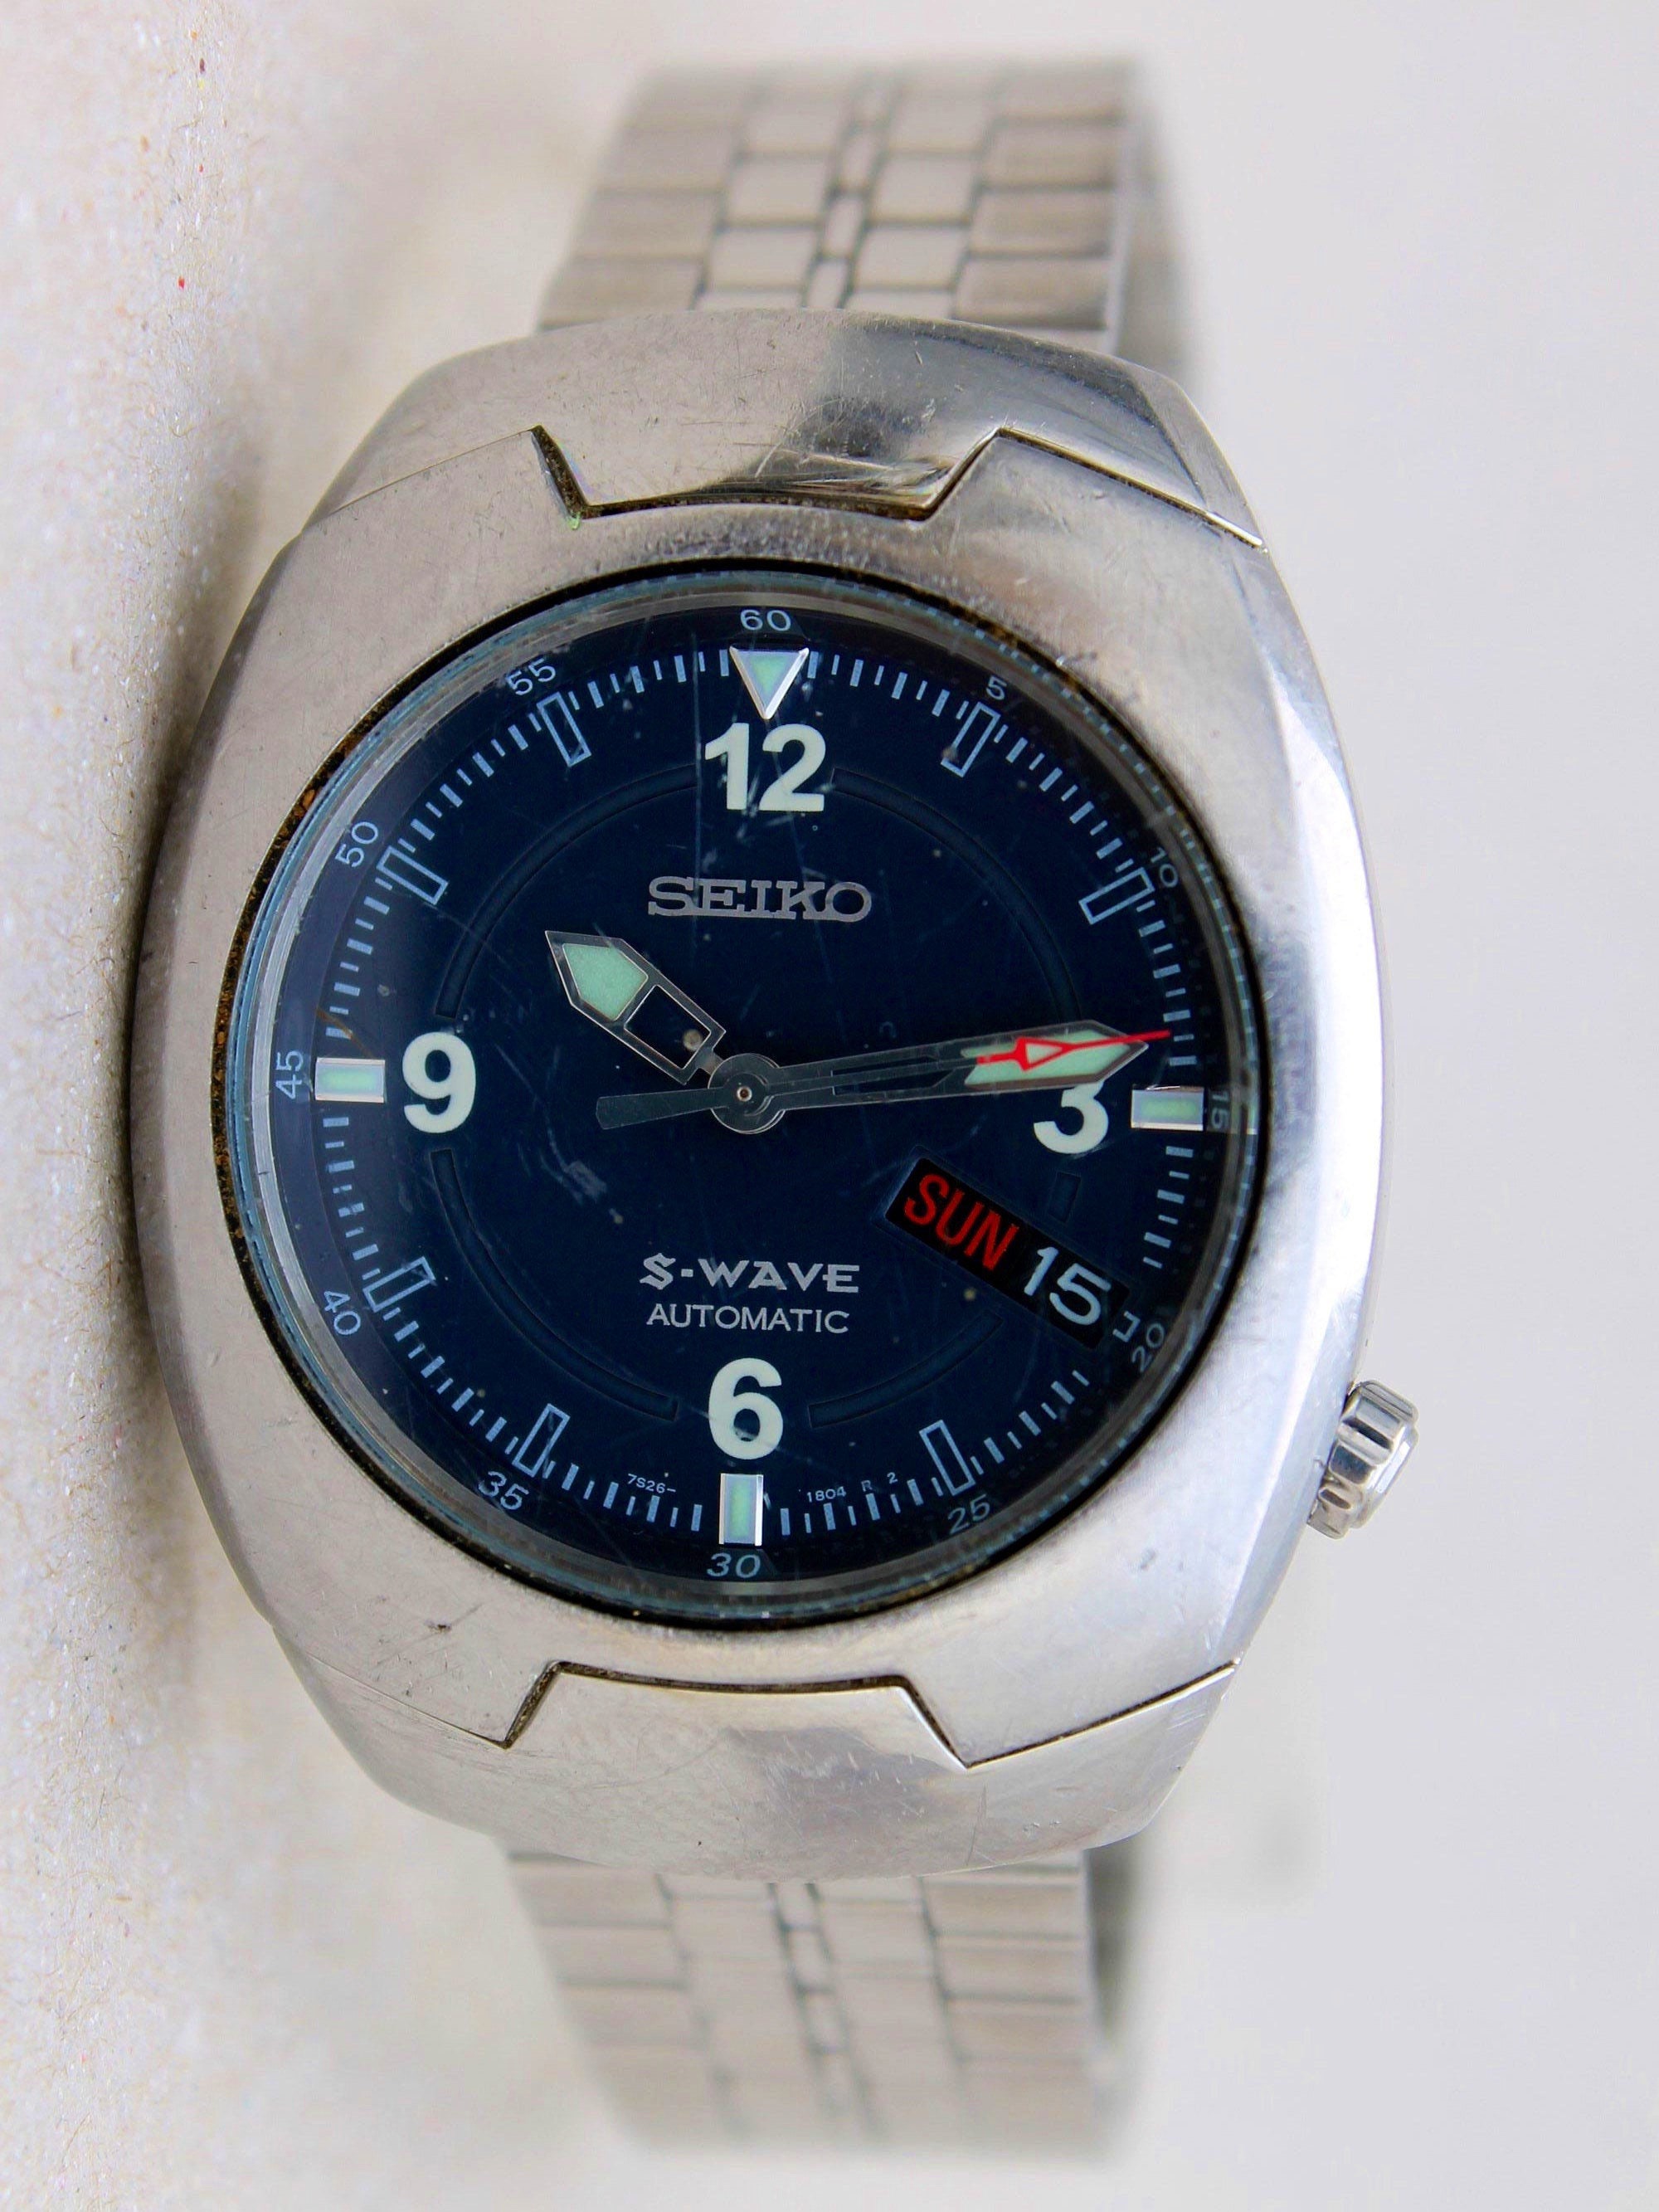 SEIKO S-WAVE Automatic Mens Wristwatch Day Date Blue Dial - Etsy